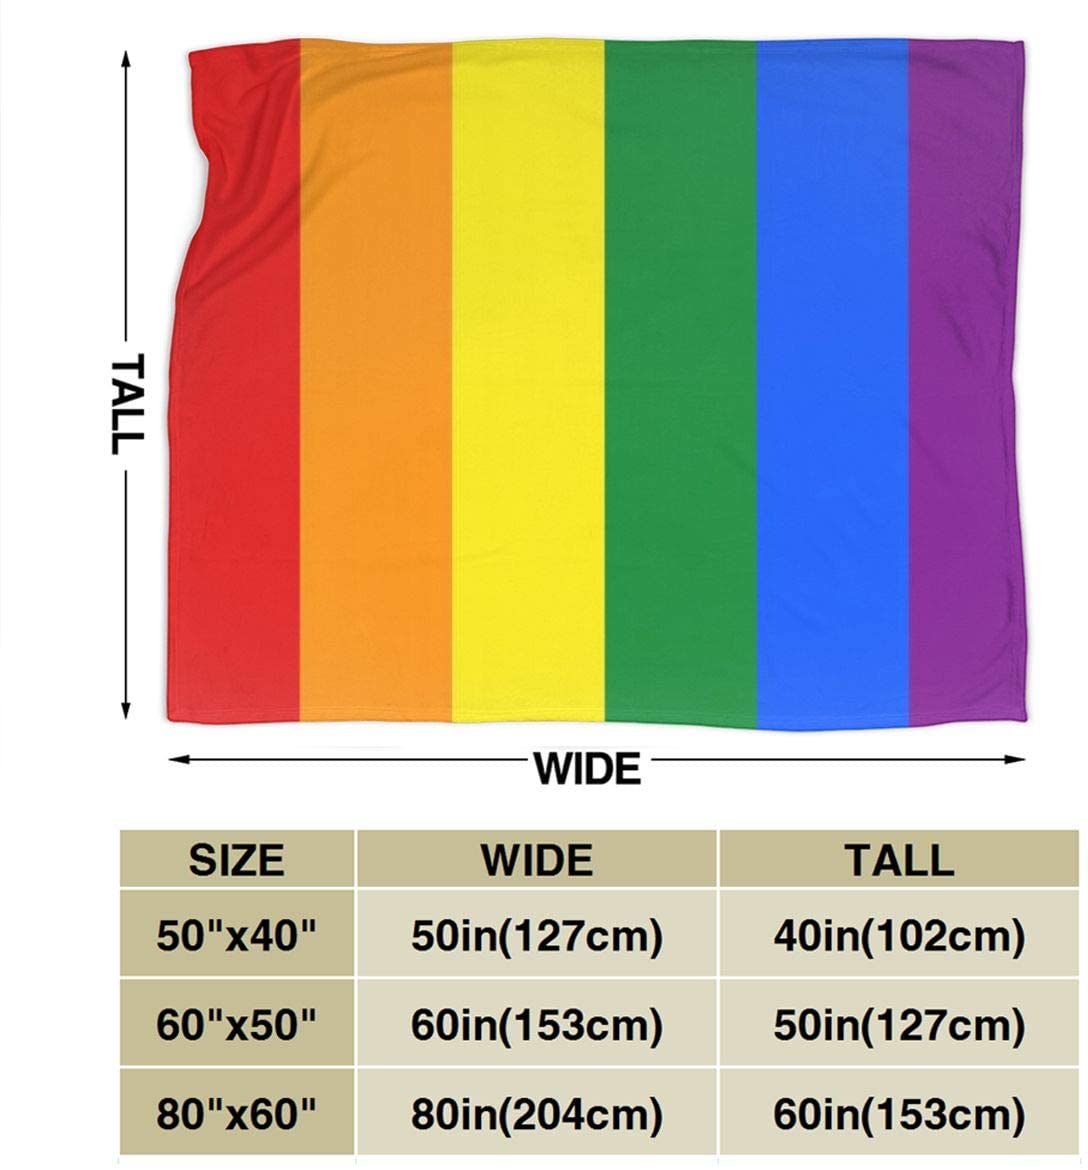 Flannel Blanket Lgbt Rainbow Flag Lightweight Cozy Bed Blanket Soft Throw Blanket Fits Couch Sofa For Pride Month